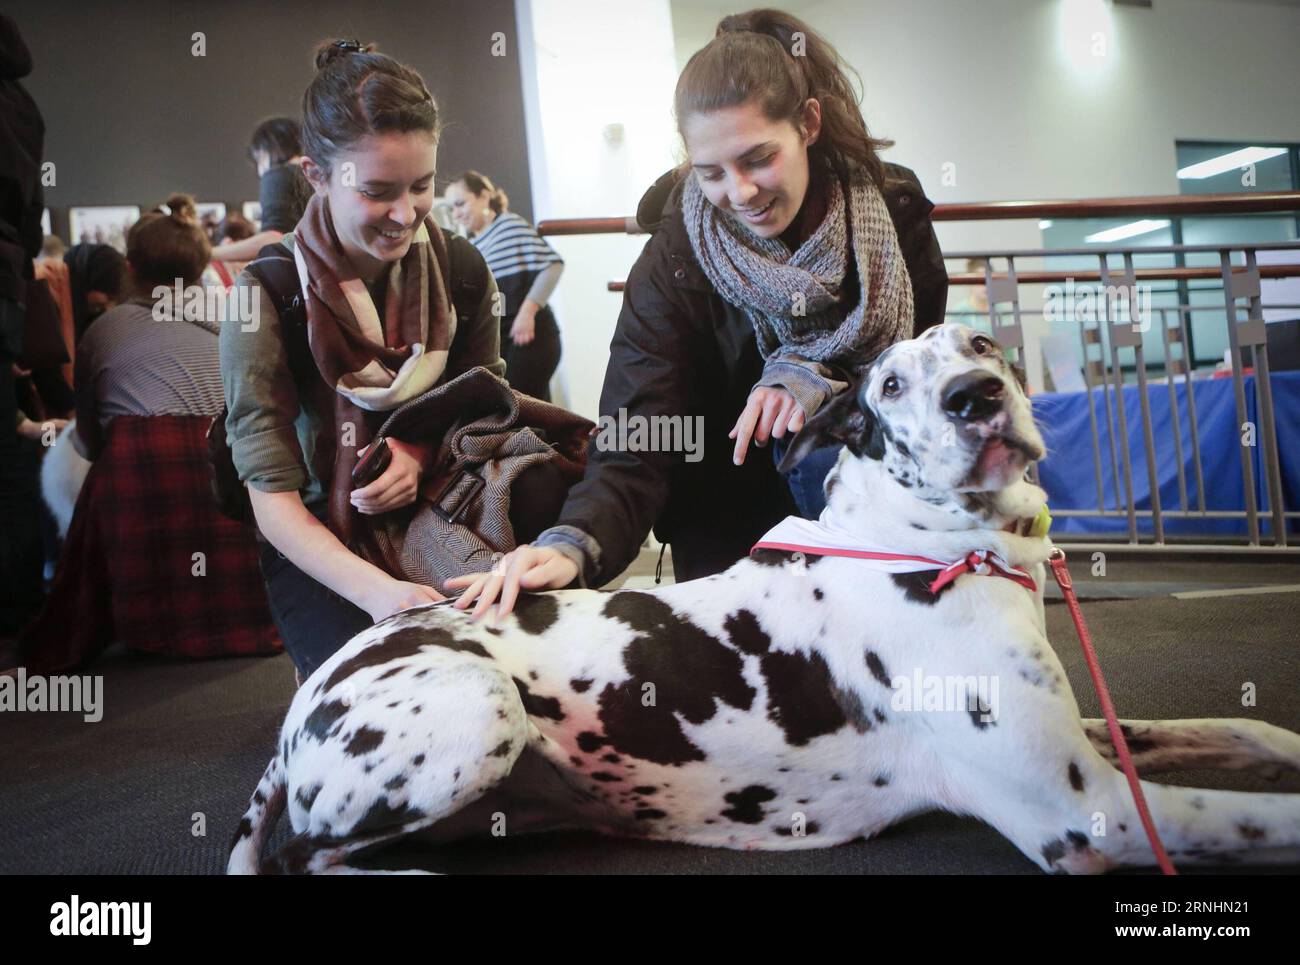 (161130) -- VANCOUVER, Nov. 30, 2016 -- Students play with a dog during the puppy therapy event at Simon Fraser University in Vancouver, Canada, Nov. 29, 2016. Simon Fraser University invited puppies to campus during exam time to help students take a break from the stress of end-of-term assignments. )(gj) CANADA-VANCOUVER-PUPPY THERAPY LiangxSen PUBLICATIONxNOTxINxCHN   Vancouver Nov 30 2016 Students Play With a Dog during The Puppy THERAPY Event AT Simon Fraser University in Vancouver Canada Nov 29 2016 Simon Fraser University invited Puppies to Campus during Exam Time to Help Students Take a Stock Photo